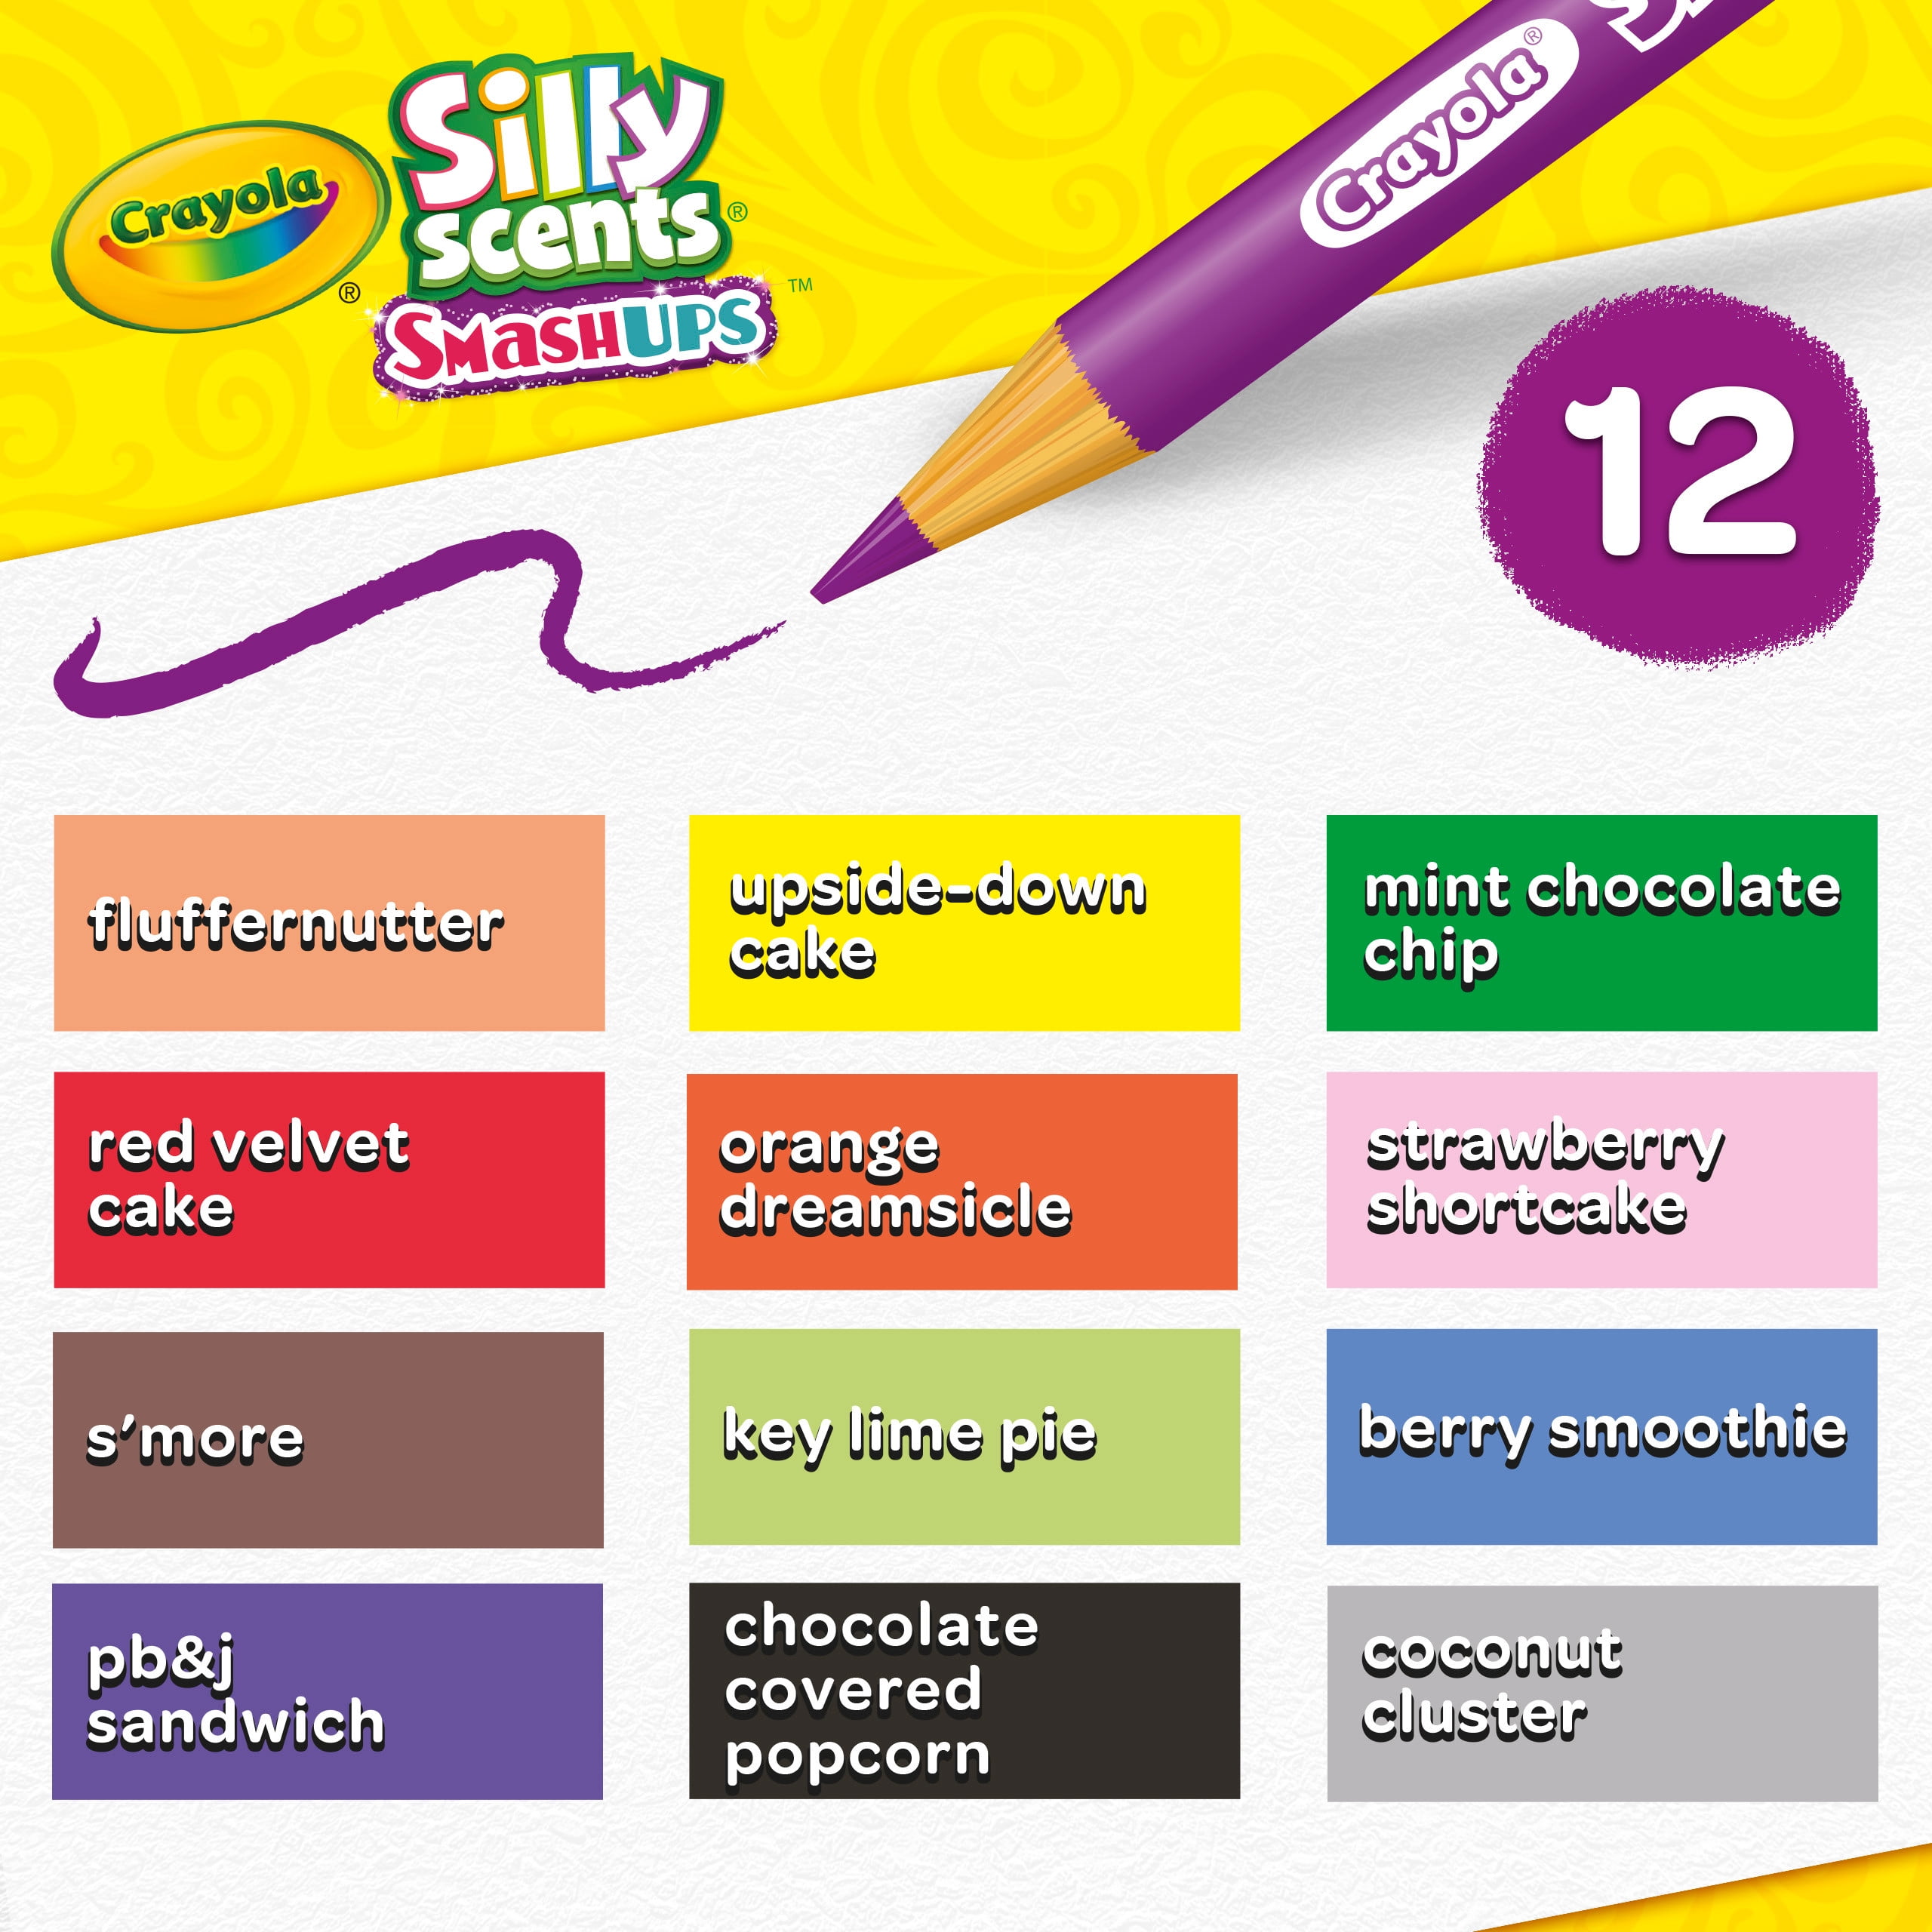 Crayola 30367680 Silly Scents Twistables Coloured Pencils - 12 Count